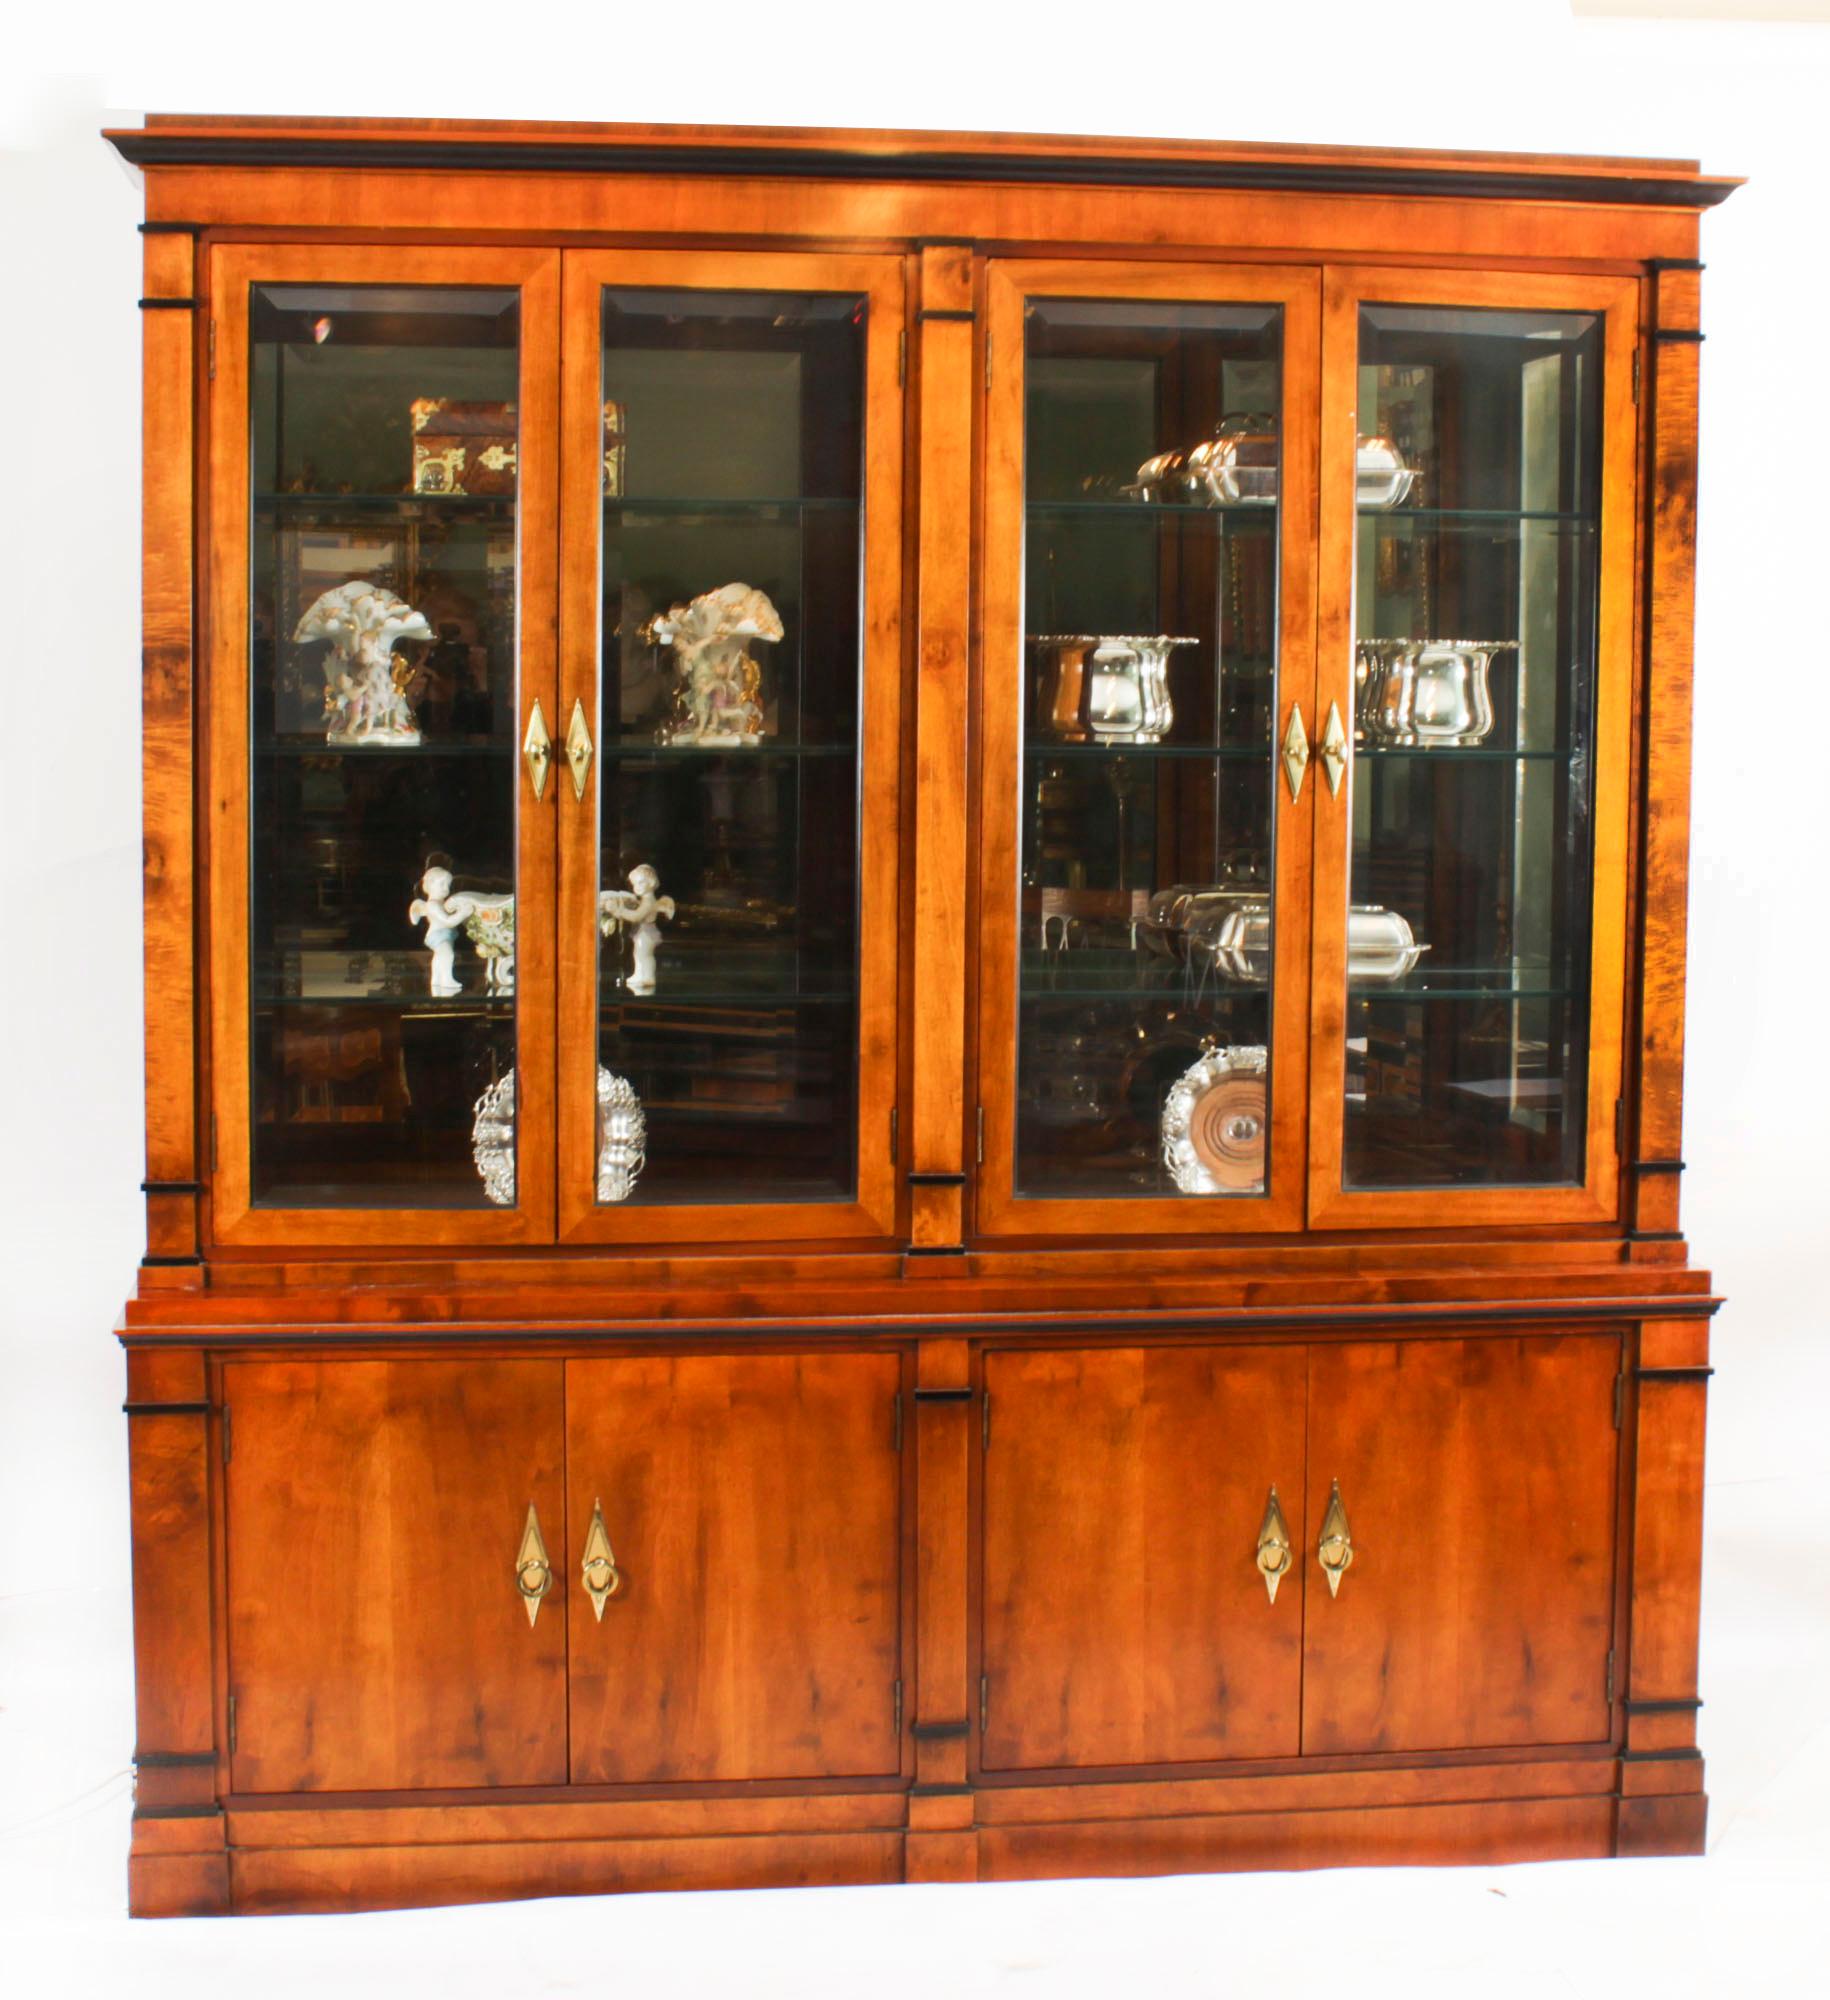 This is an elegant vintage Biedermeier Revival satin birch collectors bookcase purchased at great expense from Harrods, circa 1980 in date.

The top features four glazed bevelled doors, each opens to reveal three adjustable glass shelves. The